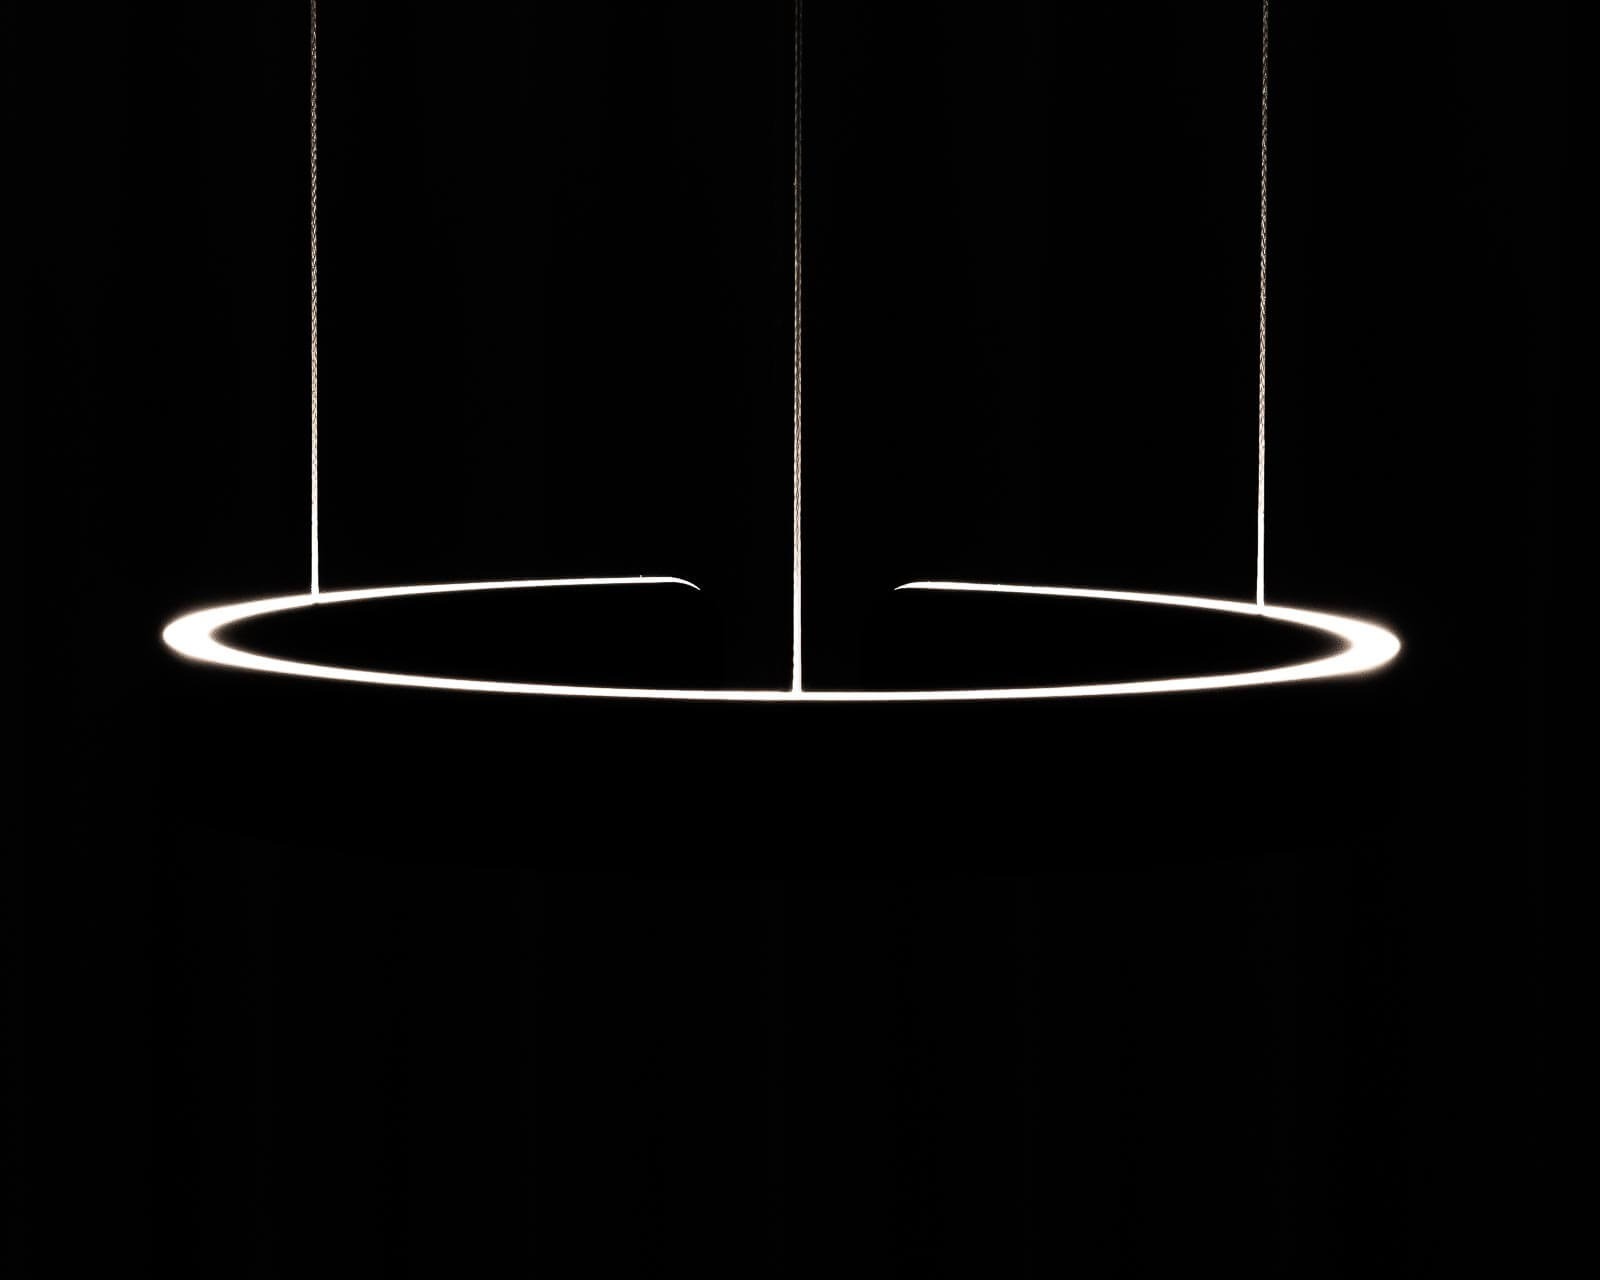 a black and white photo of a circular light fixture